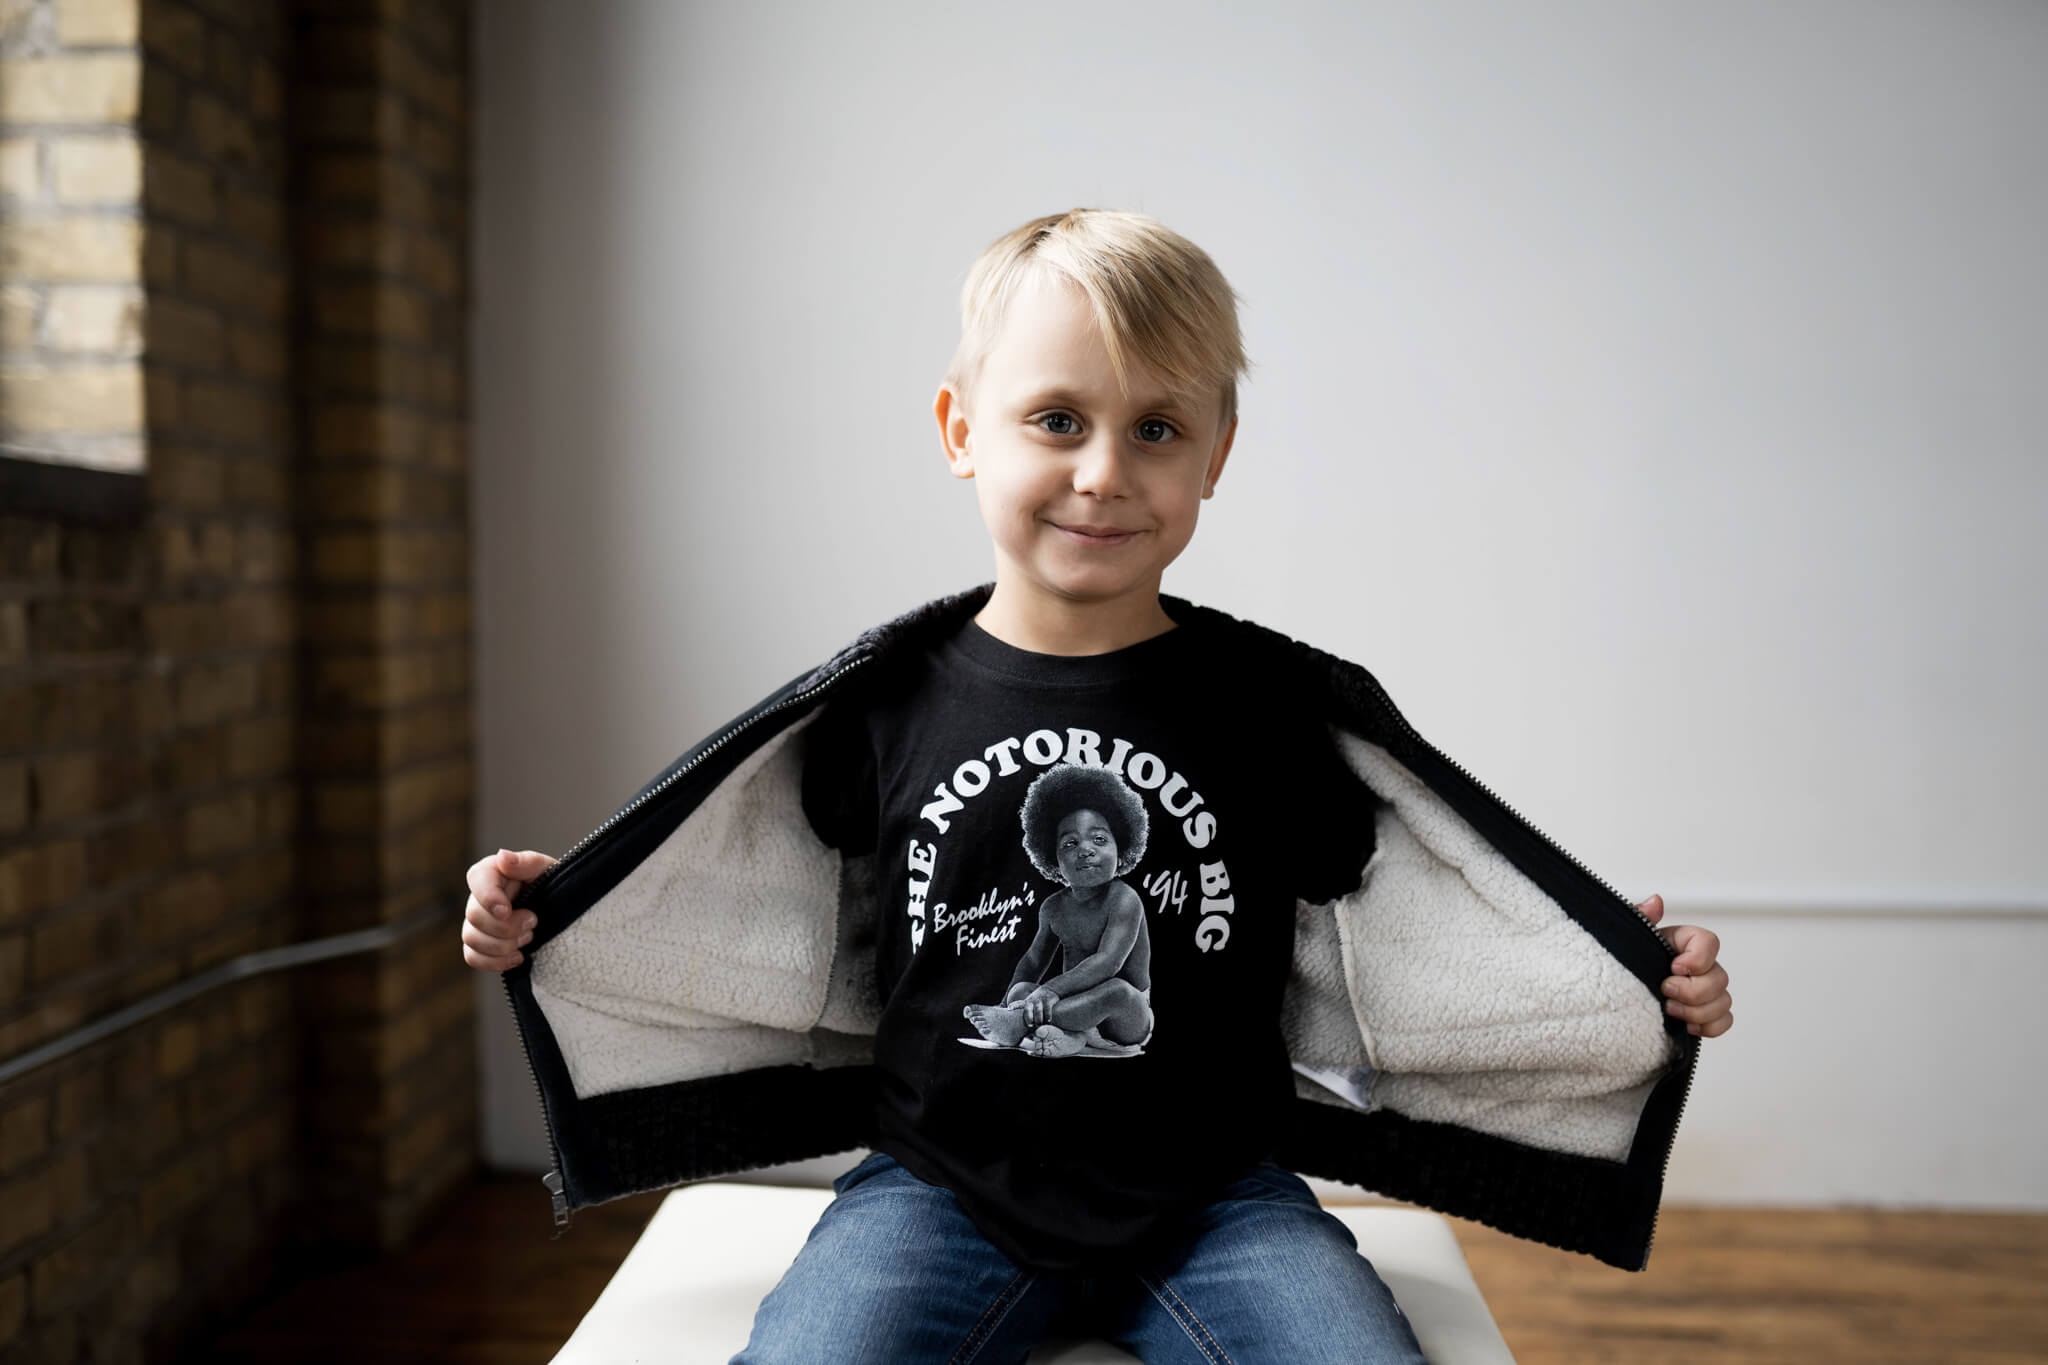 a young boy holding open his jacket to show off his "The Notorious Big" shirt underneath